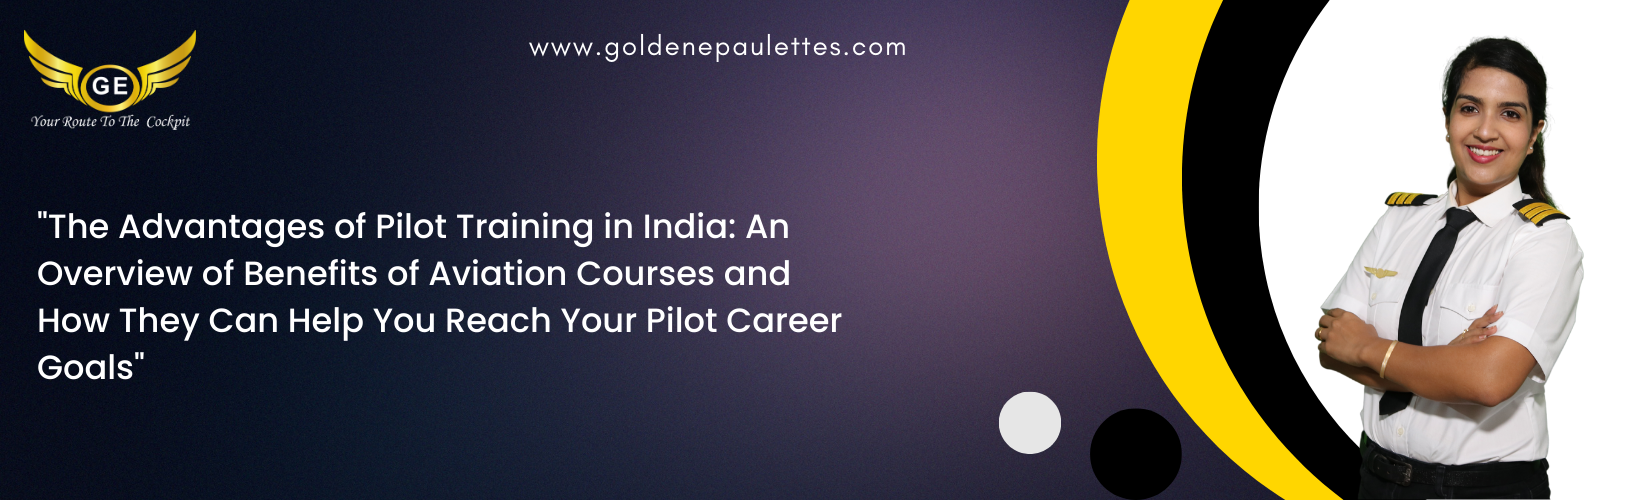 The Benefits of an Aviation Course in India